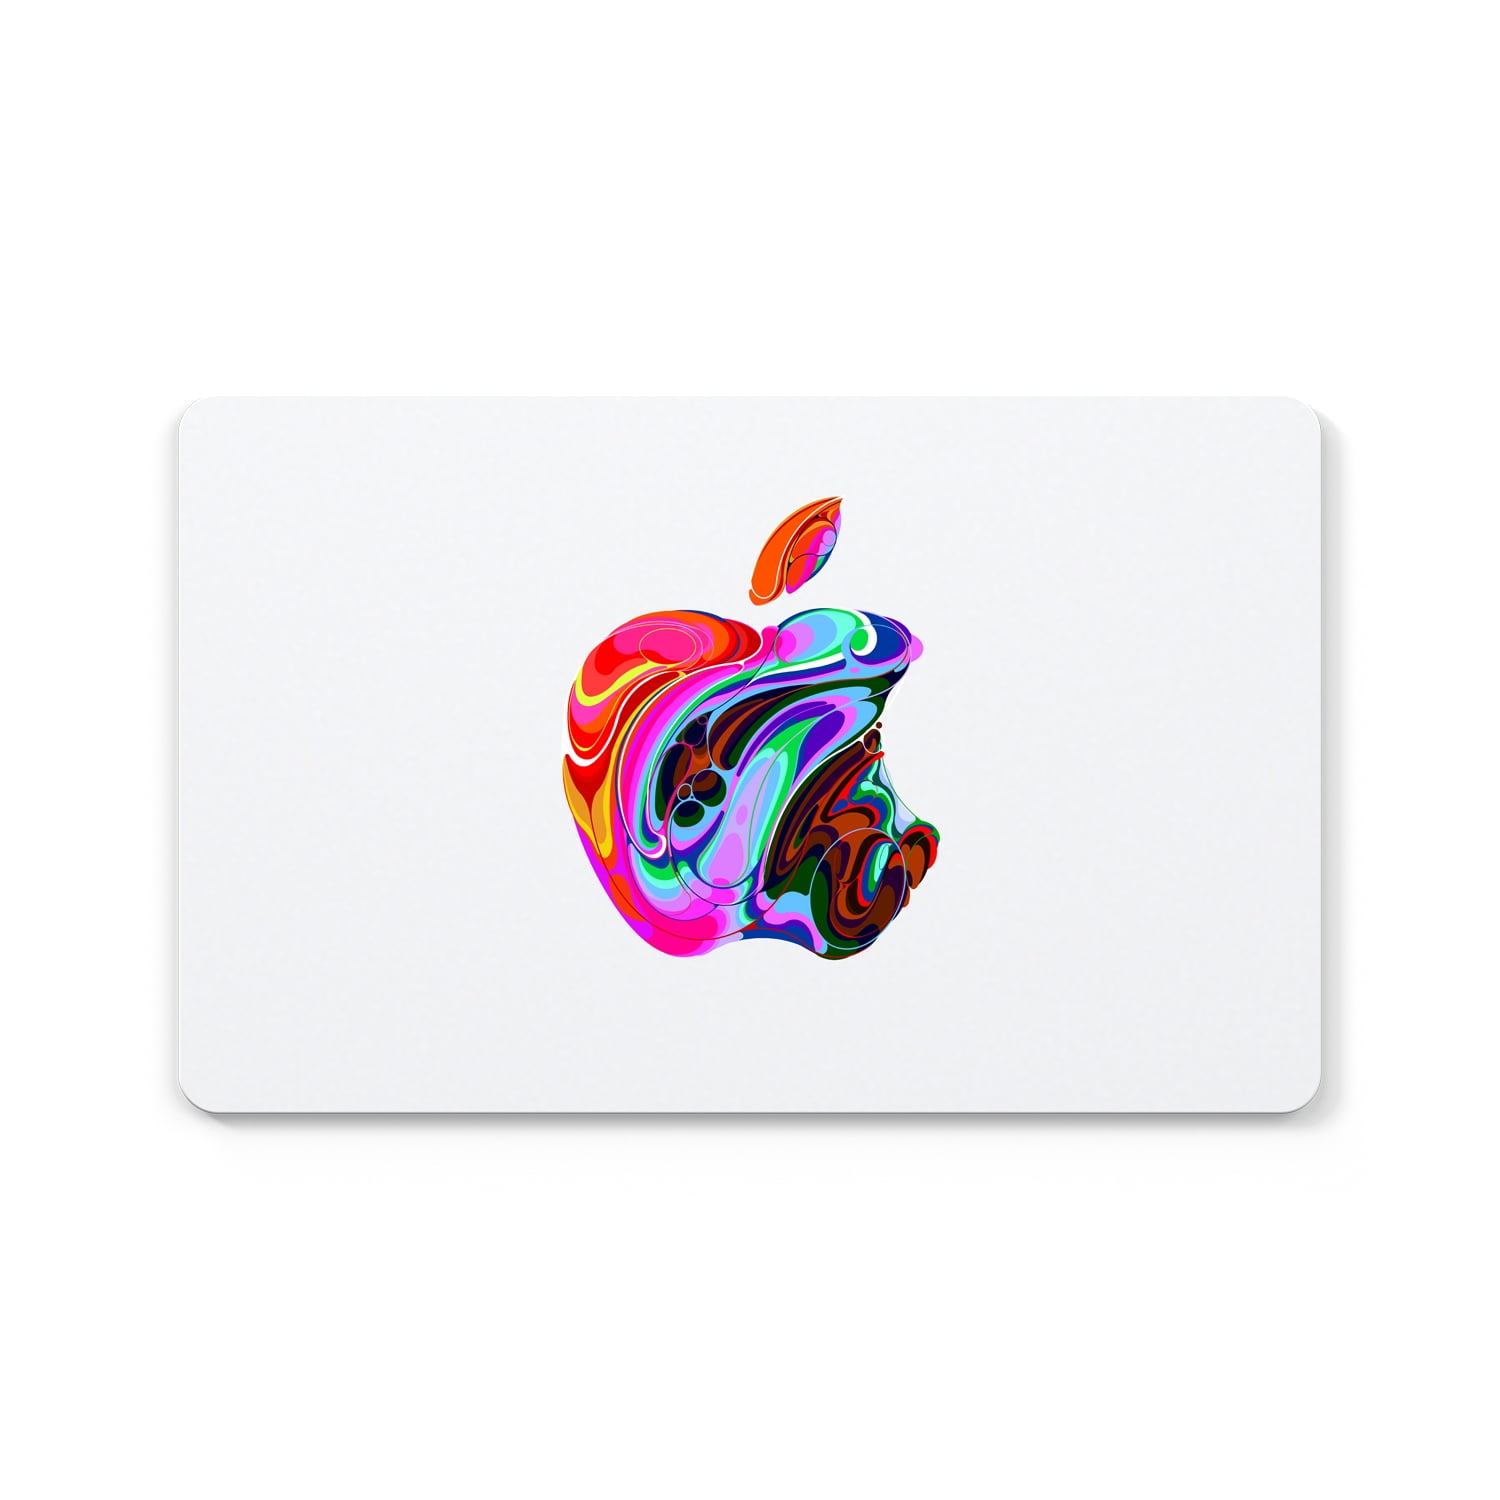 $100 Apple Delivery) Gift Card (Email